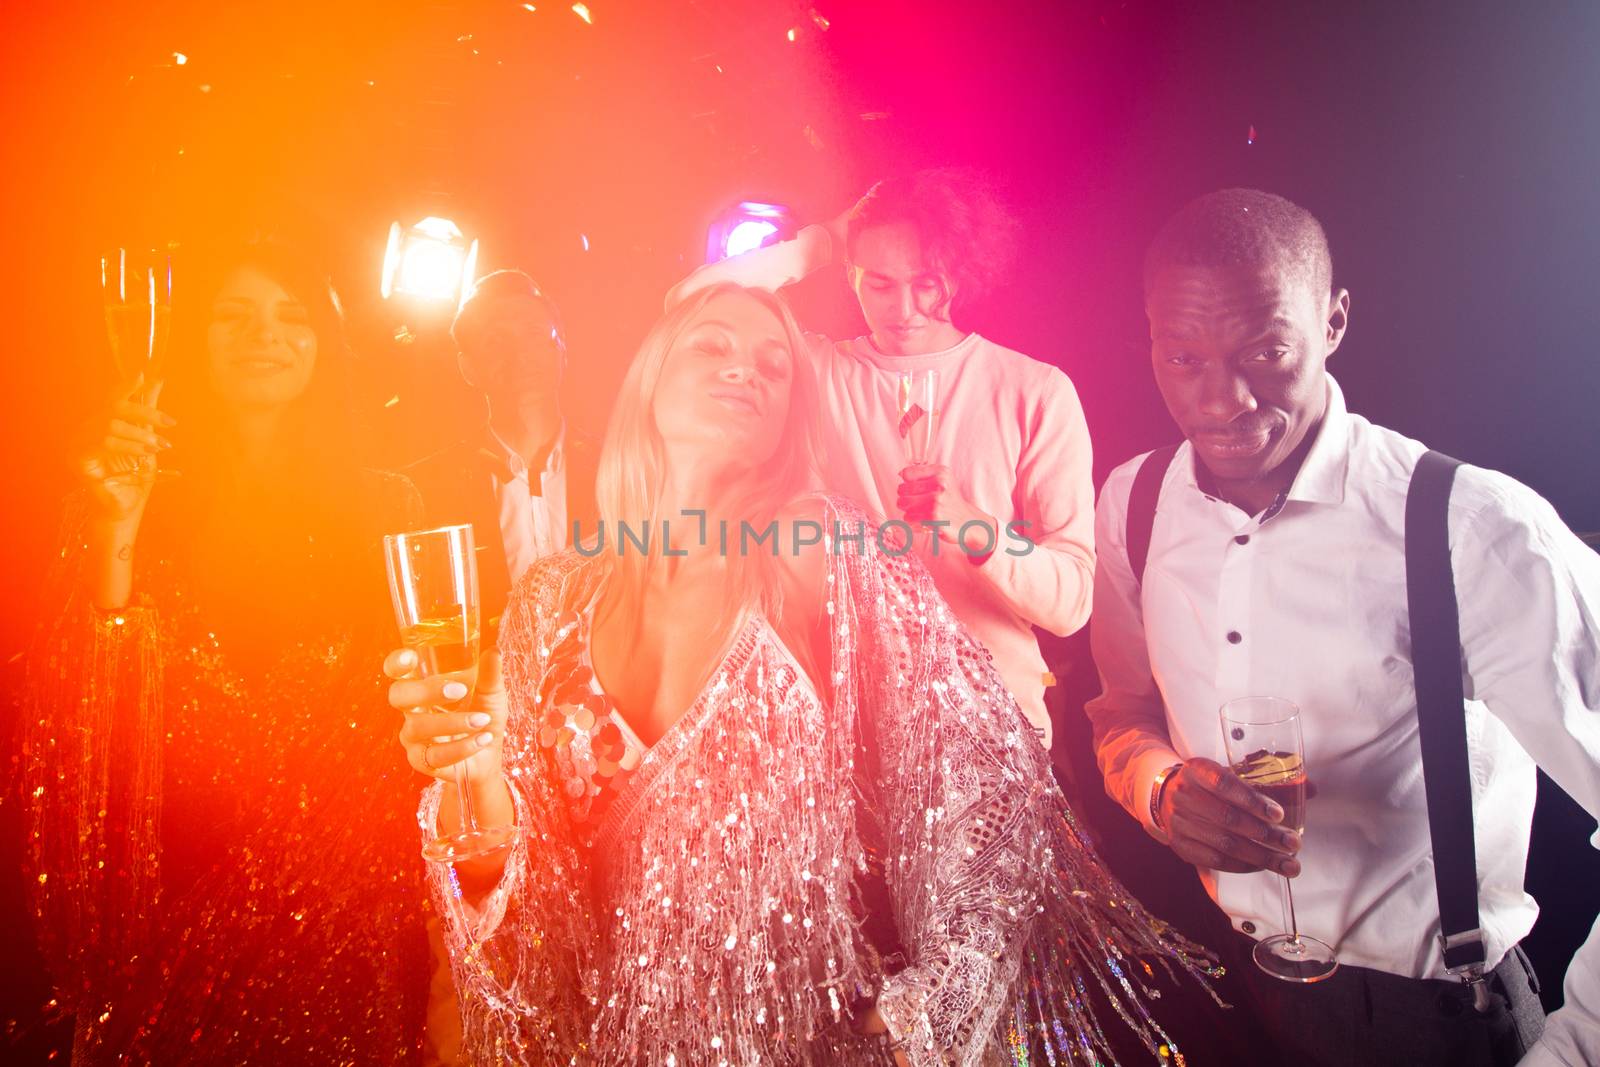 People having fun at 80s retro style party. People wearing costumes drinking champagne and dancing on dancefloor at nightclub in golden confetti